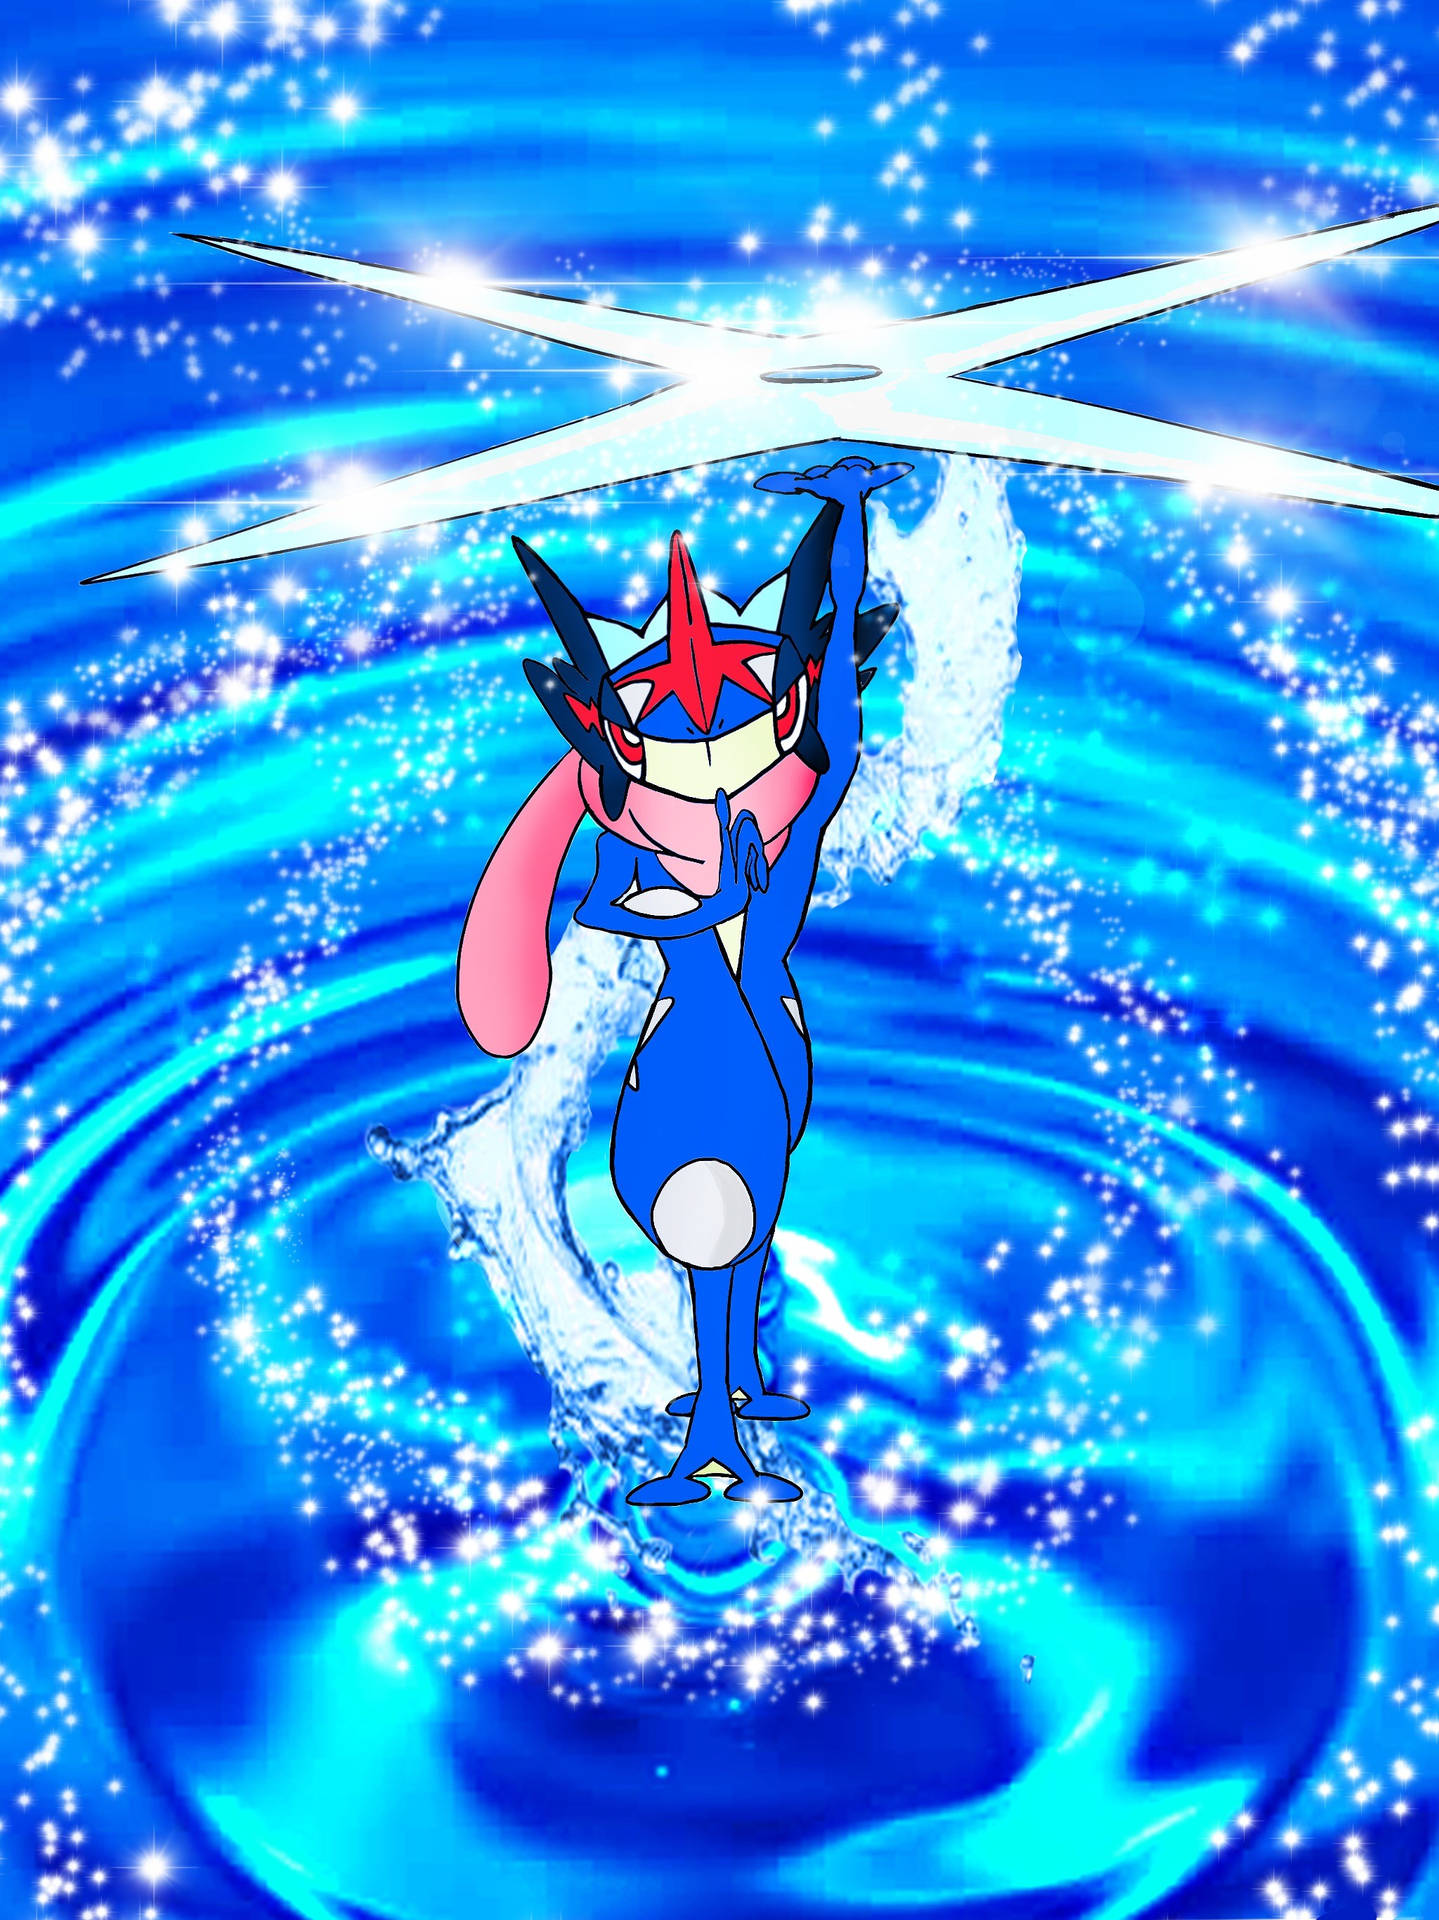 This Greninja Is Ready To Battle!